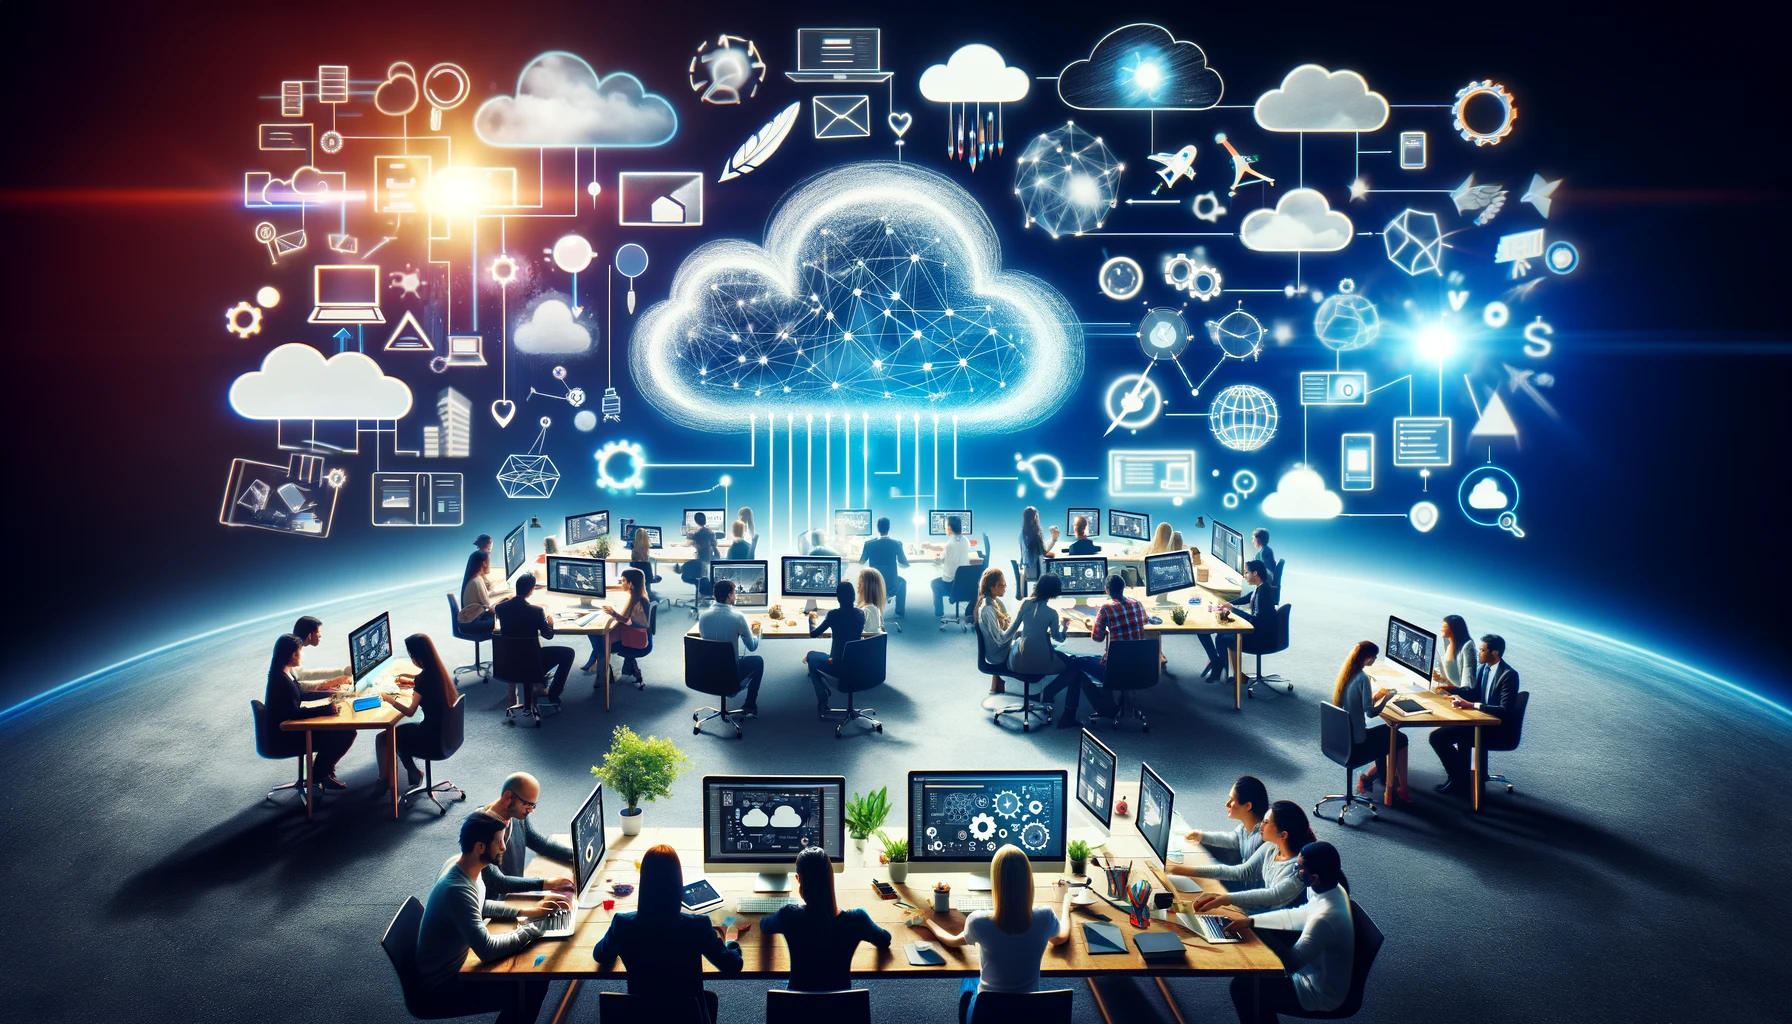 Diverse group of designers and artists collaborating on a shared digital project through various devices connected by clouds and digital networks, symbolizing global teamwork and creativity enabled by cloud technology.